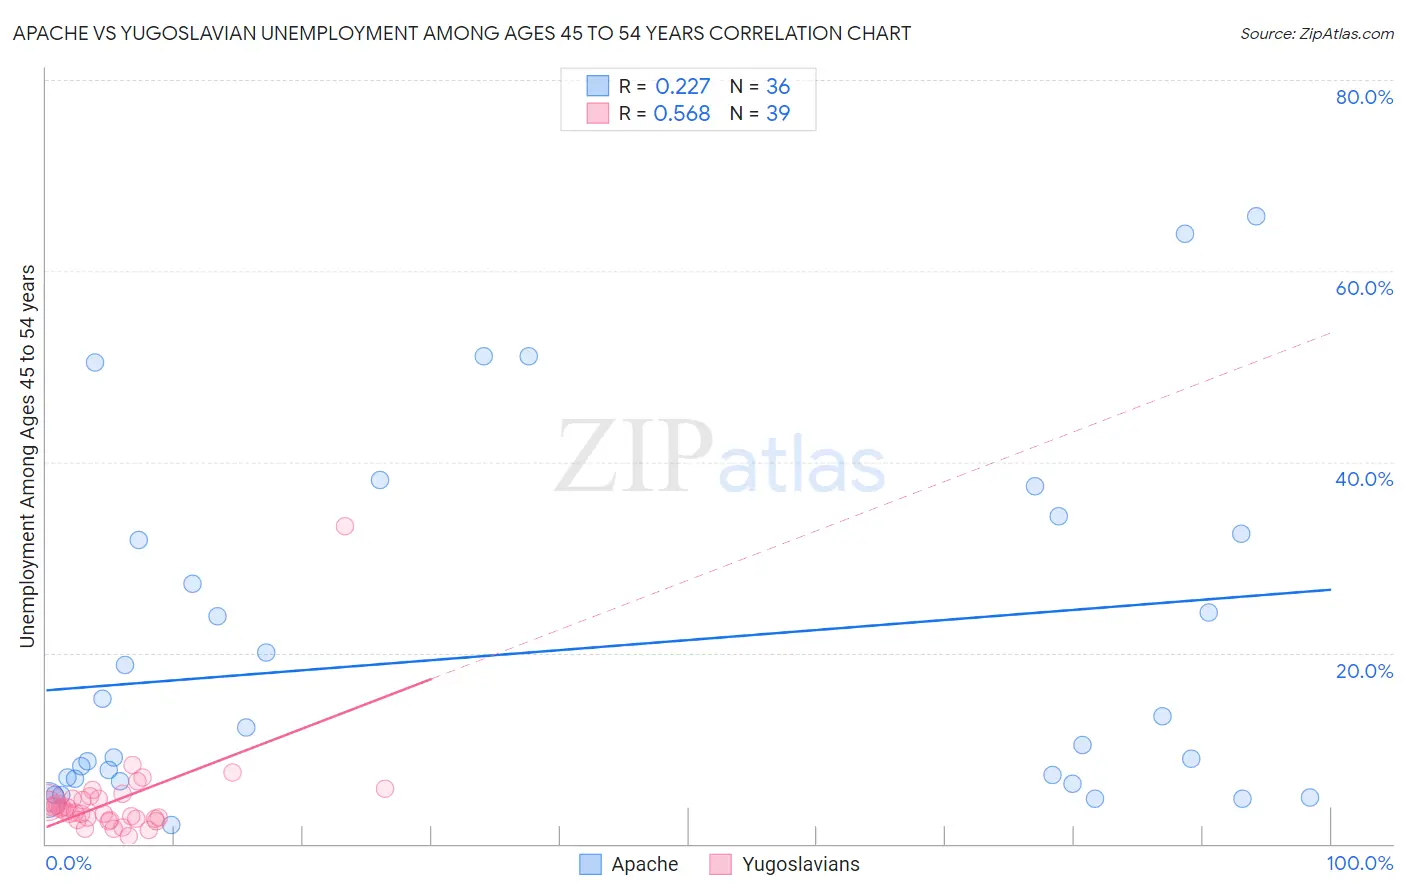 Apache vs Yugoslavian Unemployment Among Ages 45 to 54 years